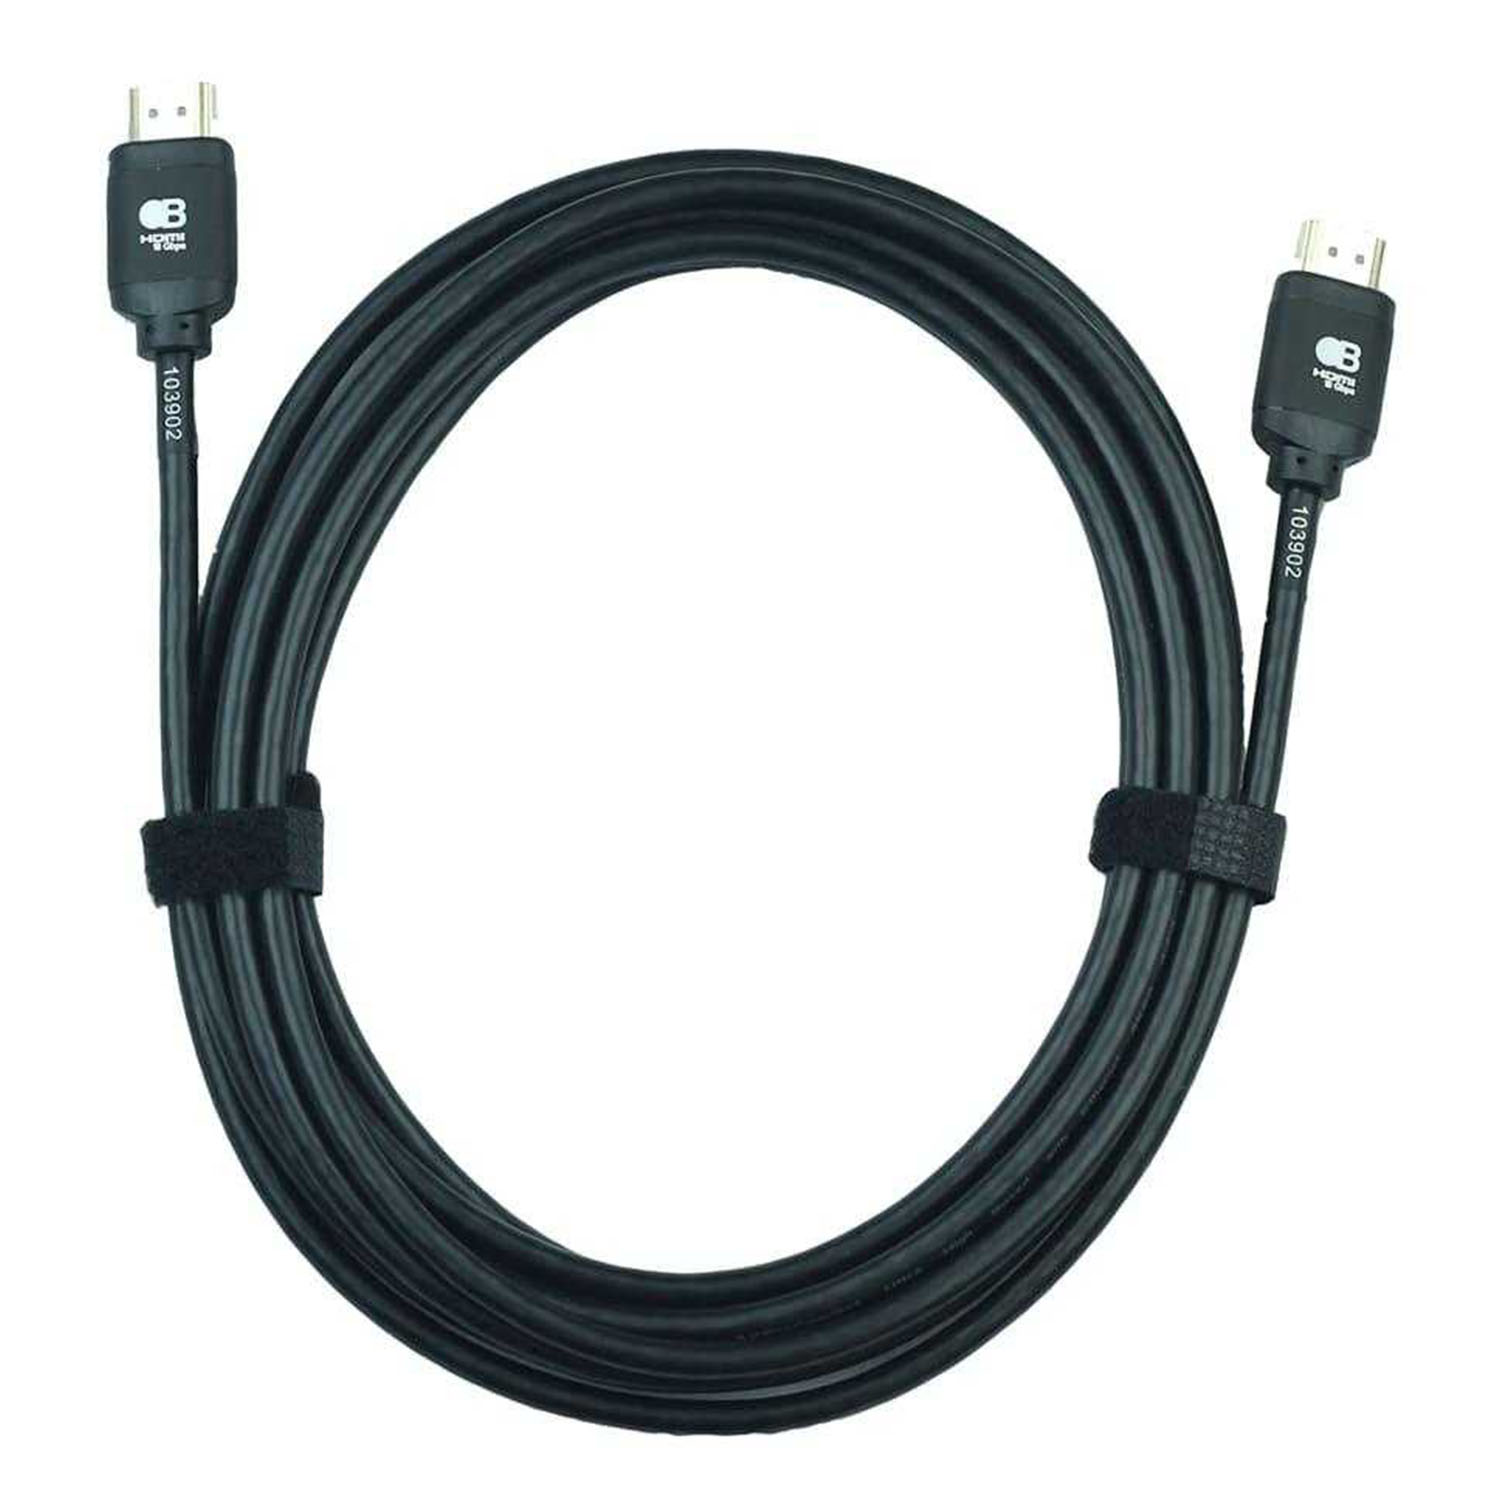 AVPro Edge Bullet Train 4M 18Gbps HDMI Cable